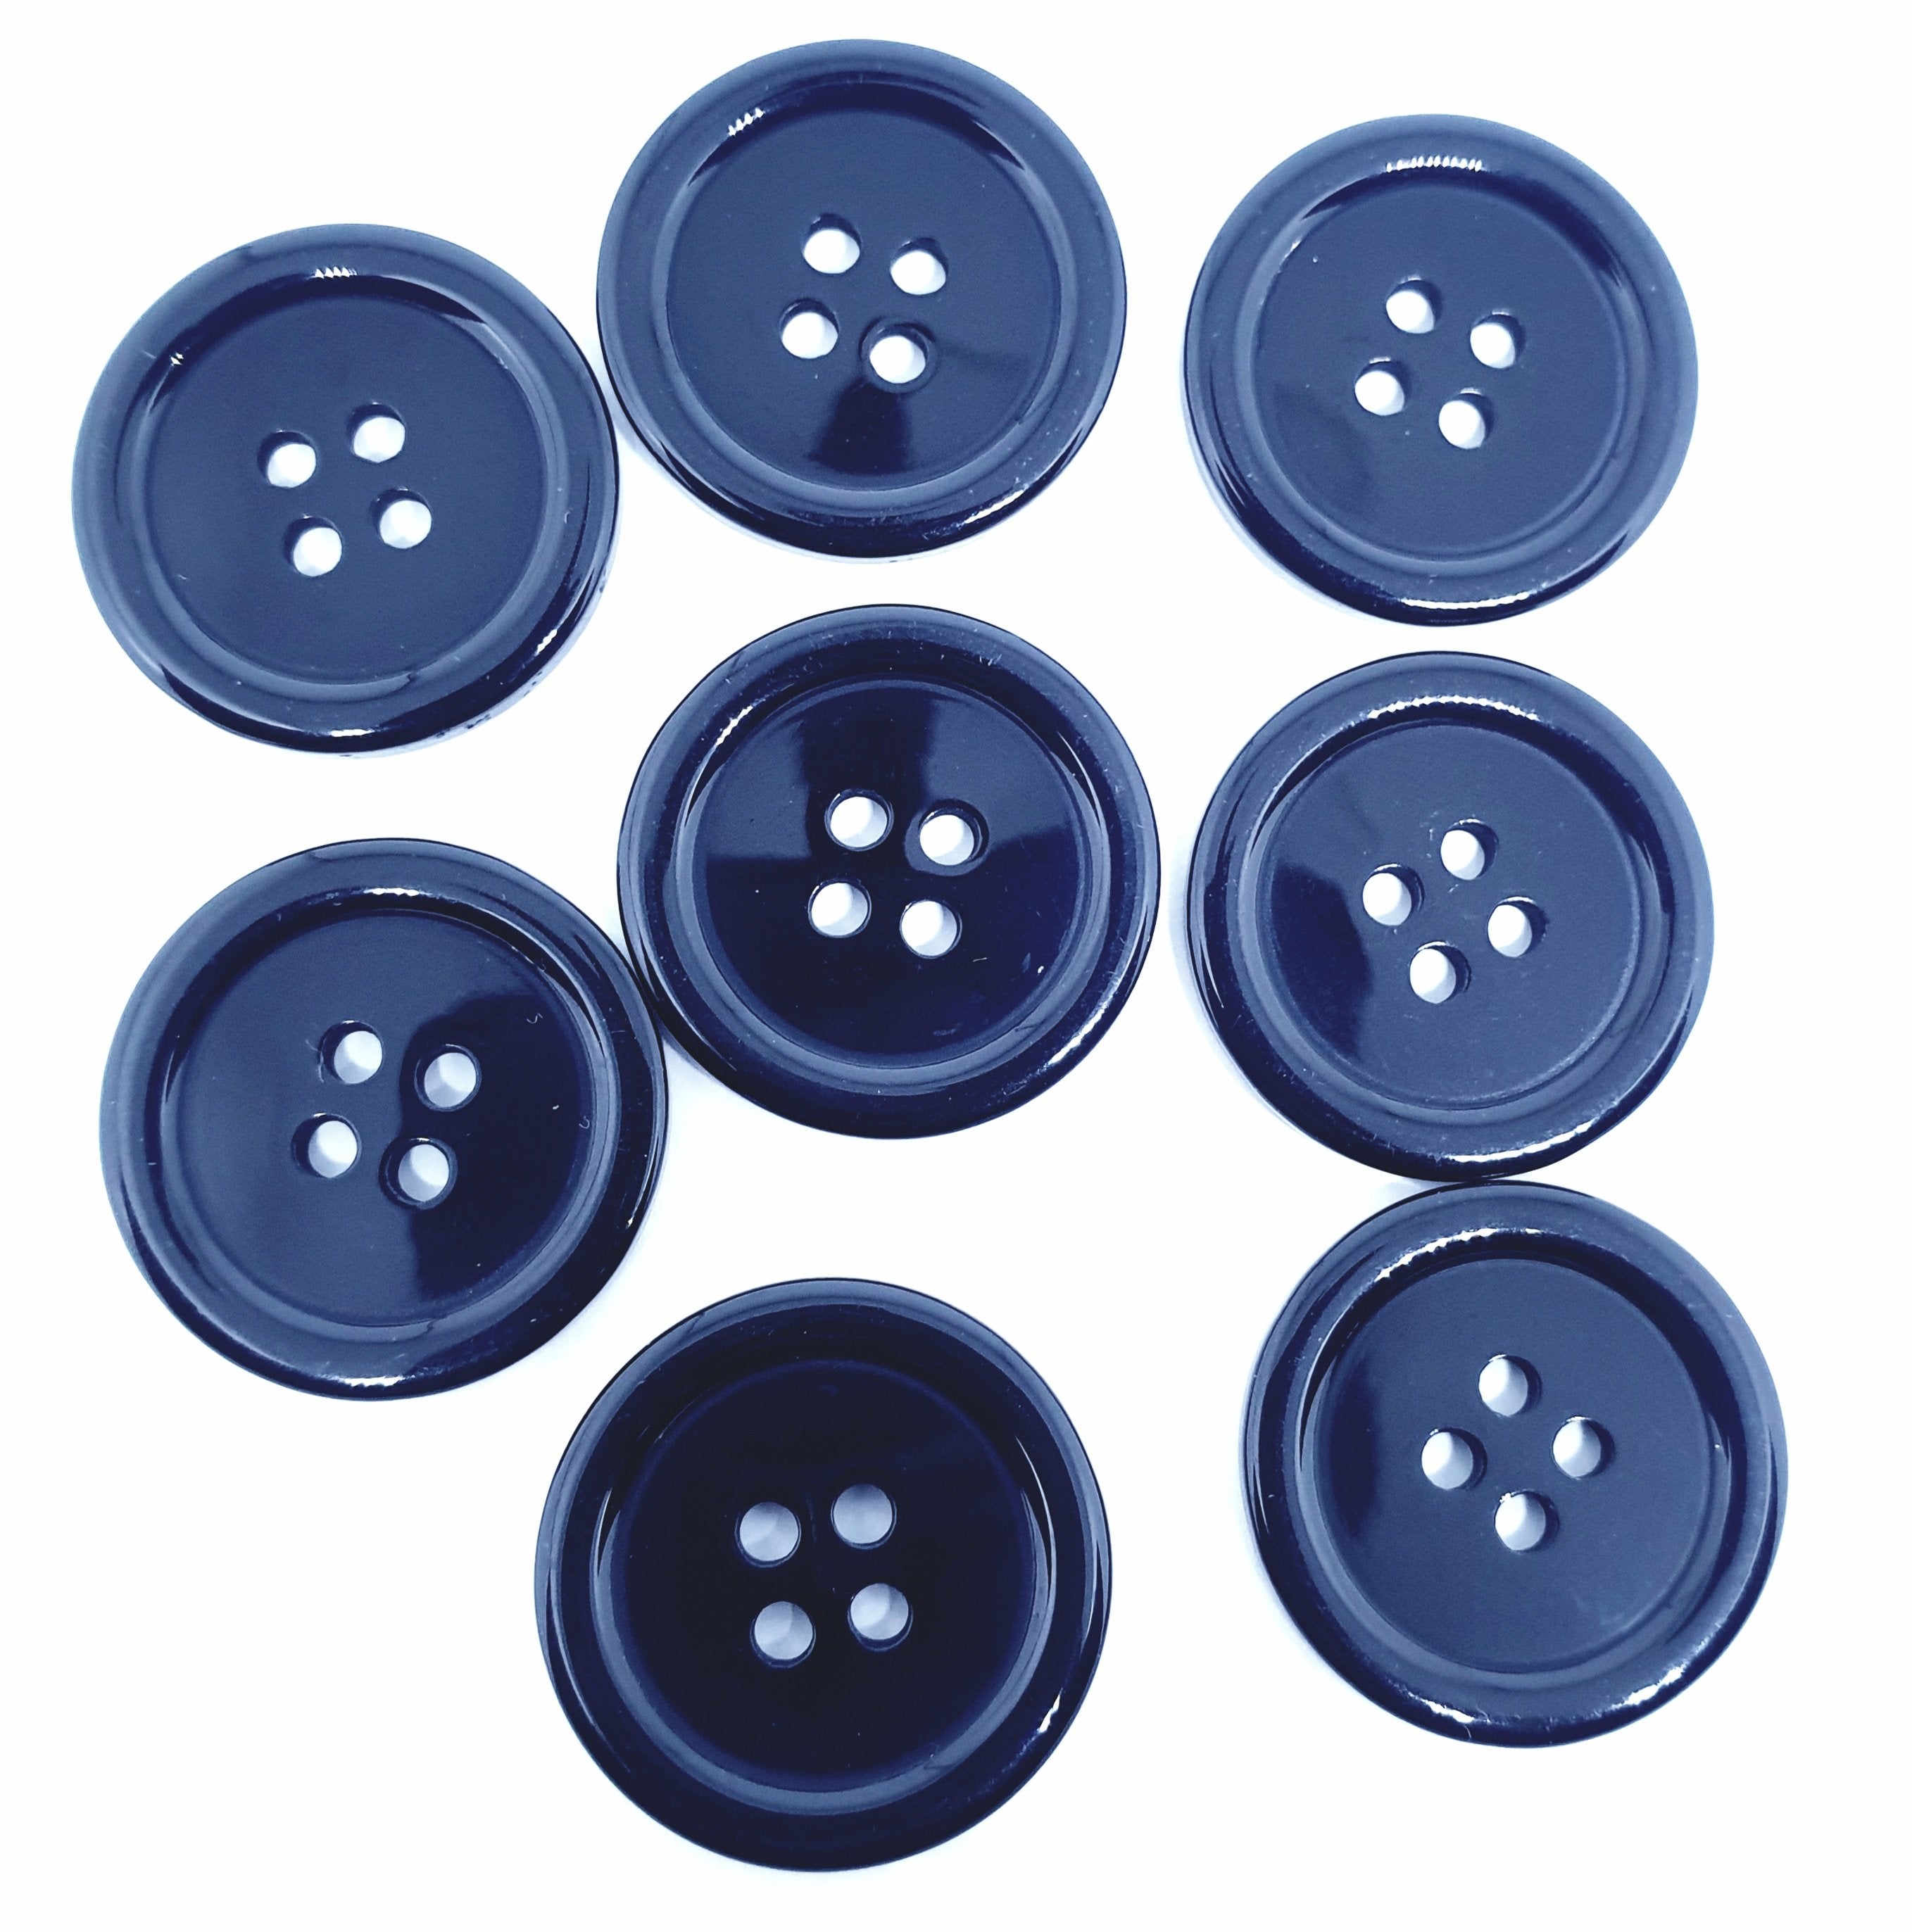 MajorCrafts 20pcs 30mm Black 4 Holes Round Large Resin Sewing Buttons